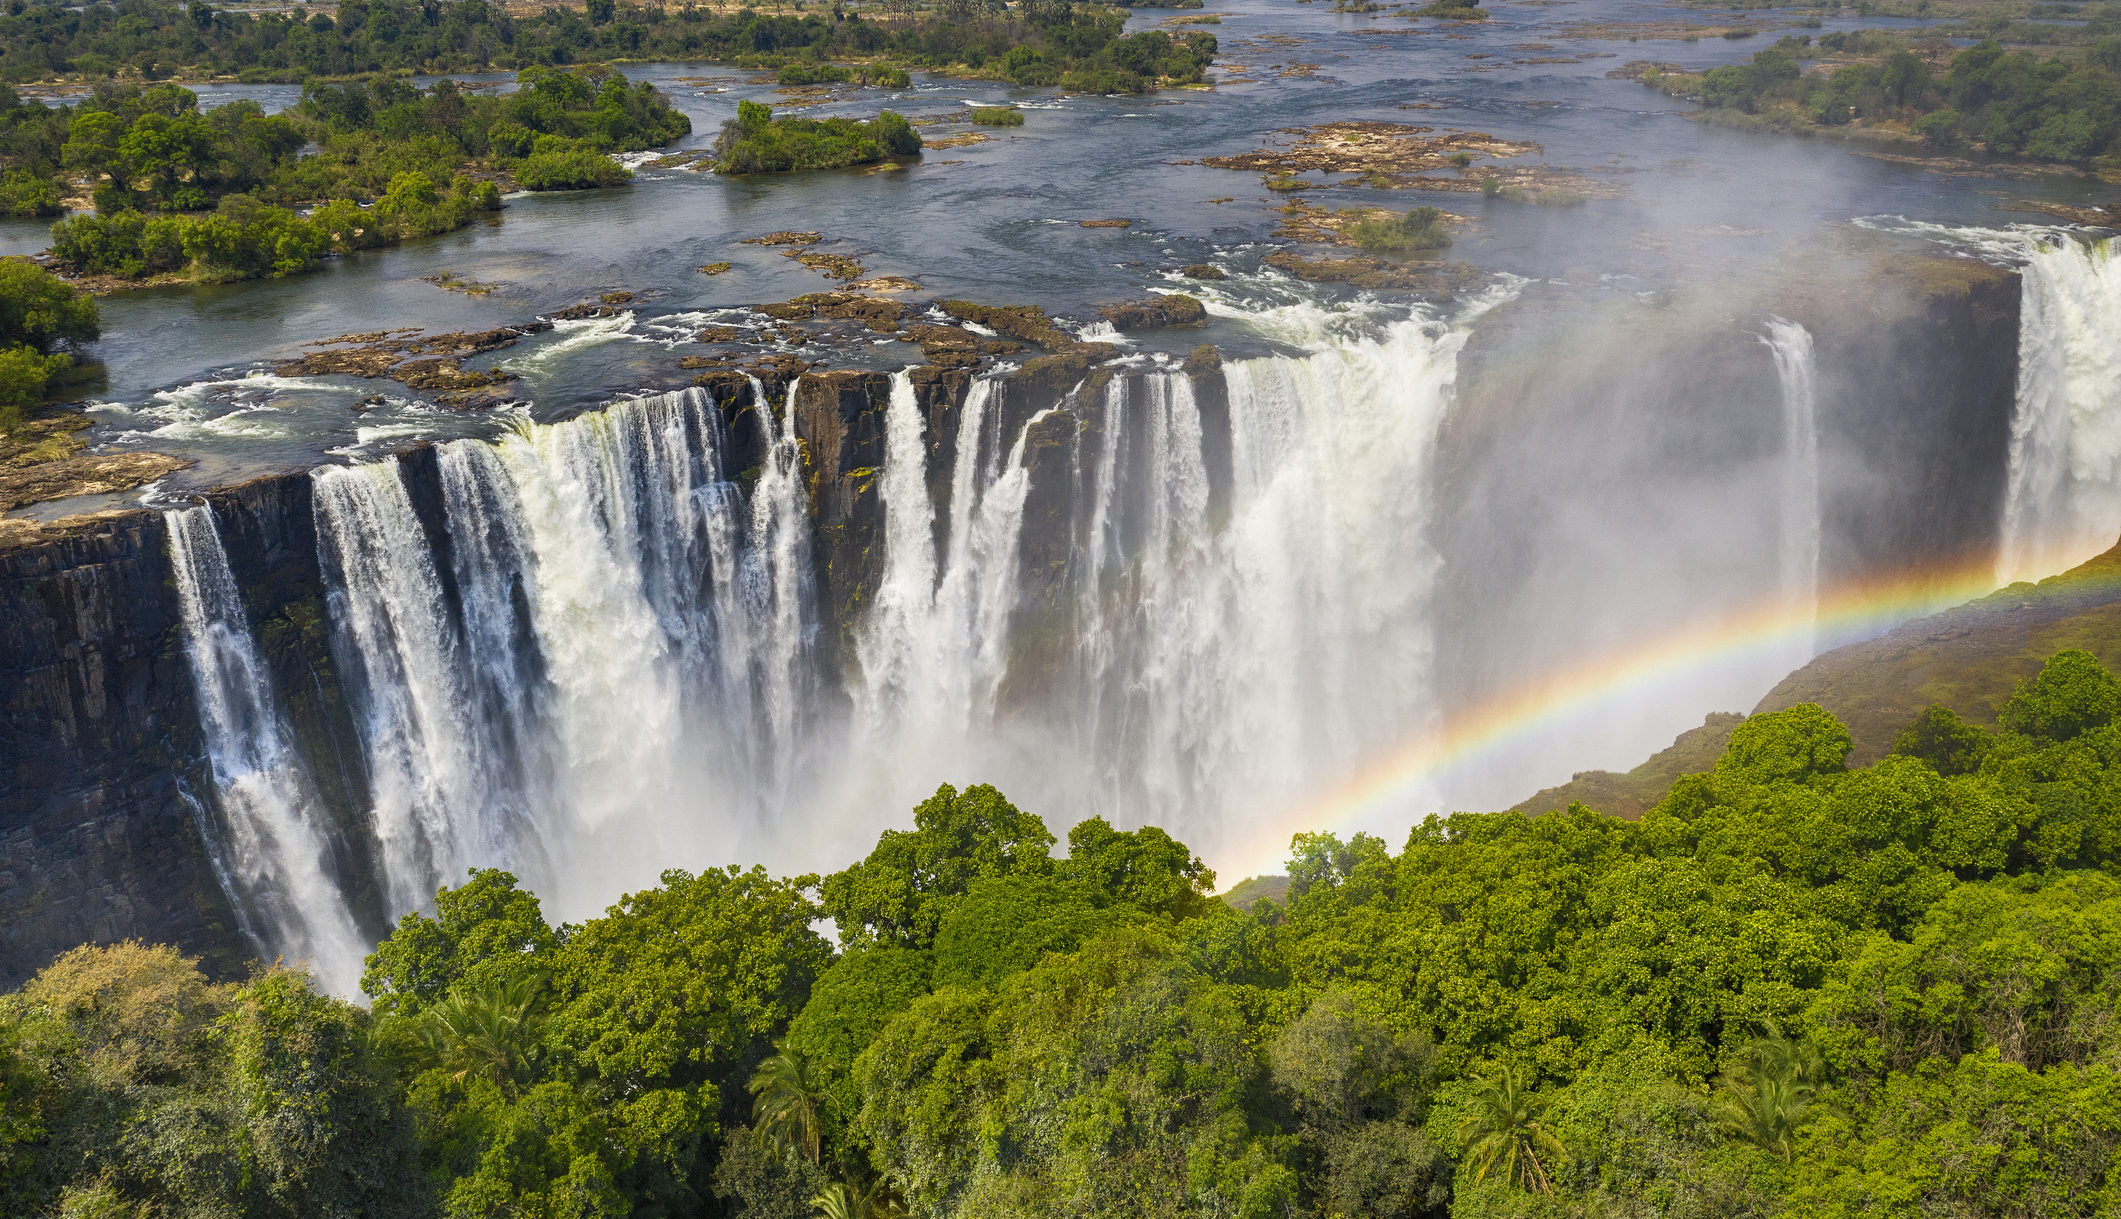 Experience remarkable Zimbabwe sights like this aerial view of Victoria Falls when you take a tailor-made holiday with Alfred&.